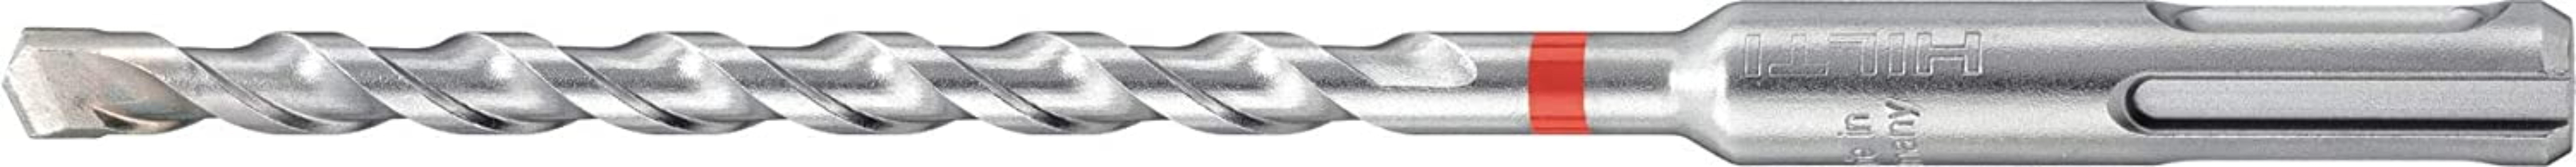 2038073 for sale online Hilti TE-C Carbide Masonry Drill Bit with SDS Plus Shank 